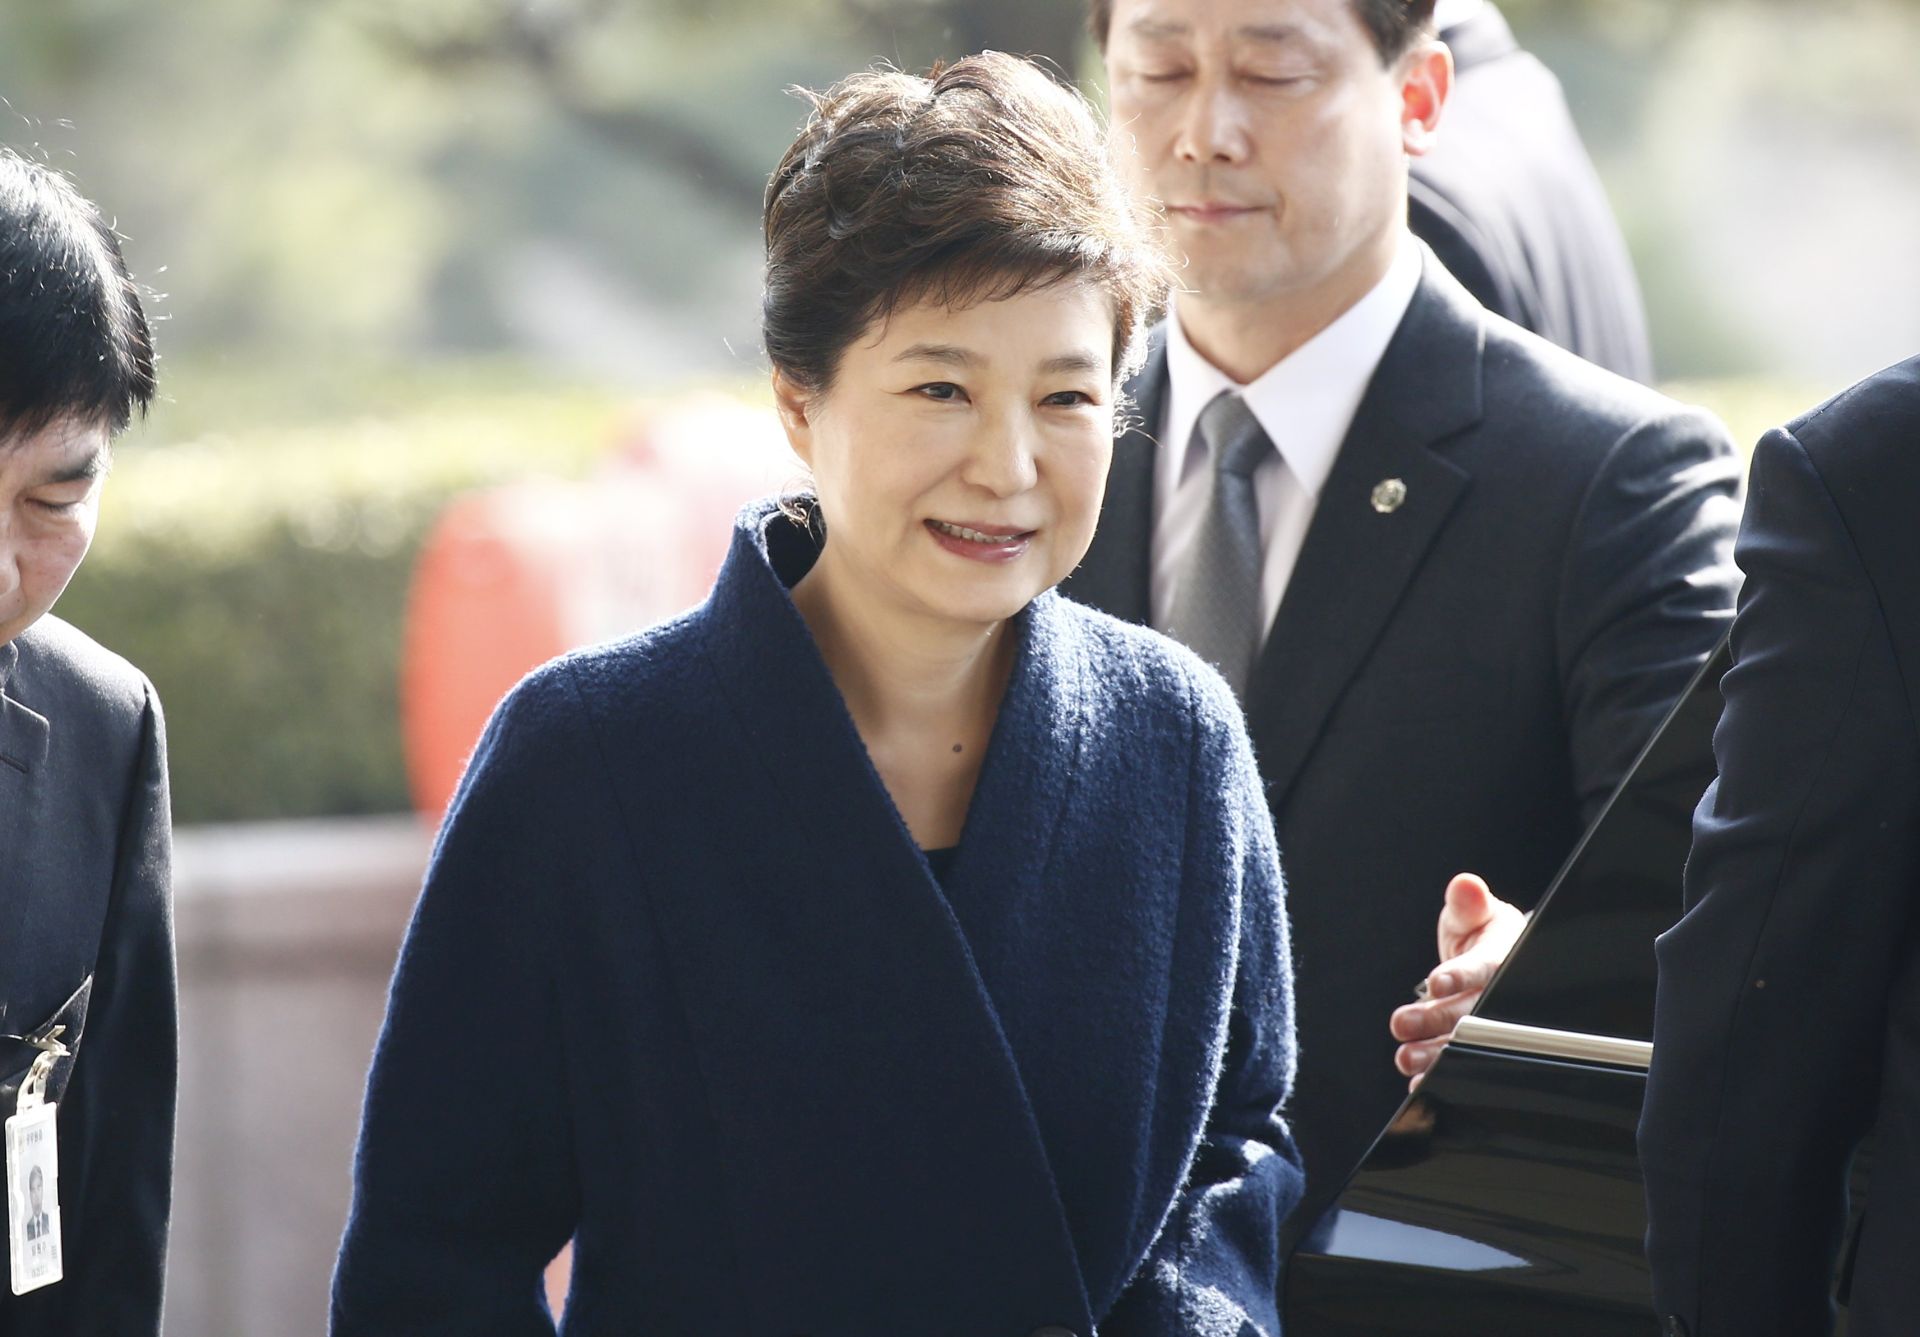 epa05860857 Impeached South Korean former President Park Geun-hye arrives to the Seoul Central District Prosecution Office for questioning in Seoul, South Korea, 21 March 2017. Former South Korean President Park Geun-hye has been named a criminal suspect for allegedly abusing her power and colluding with her confidante friend Choi Soon-sil in extorting money from local conglomerates.  EPA/JEON HEON-KYUN / POOL